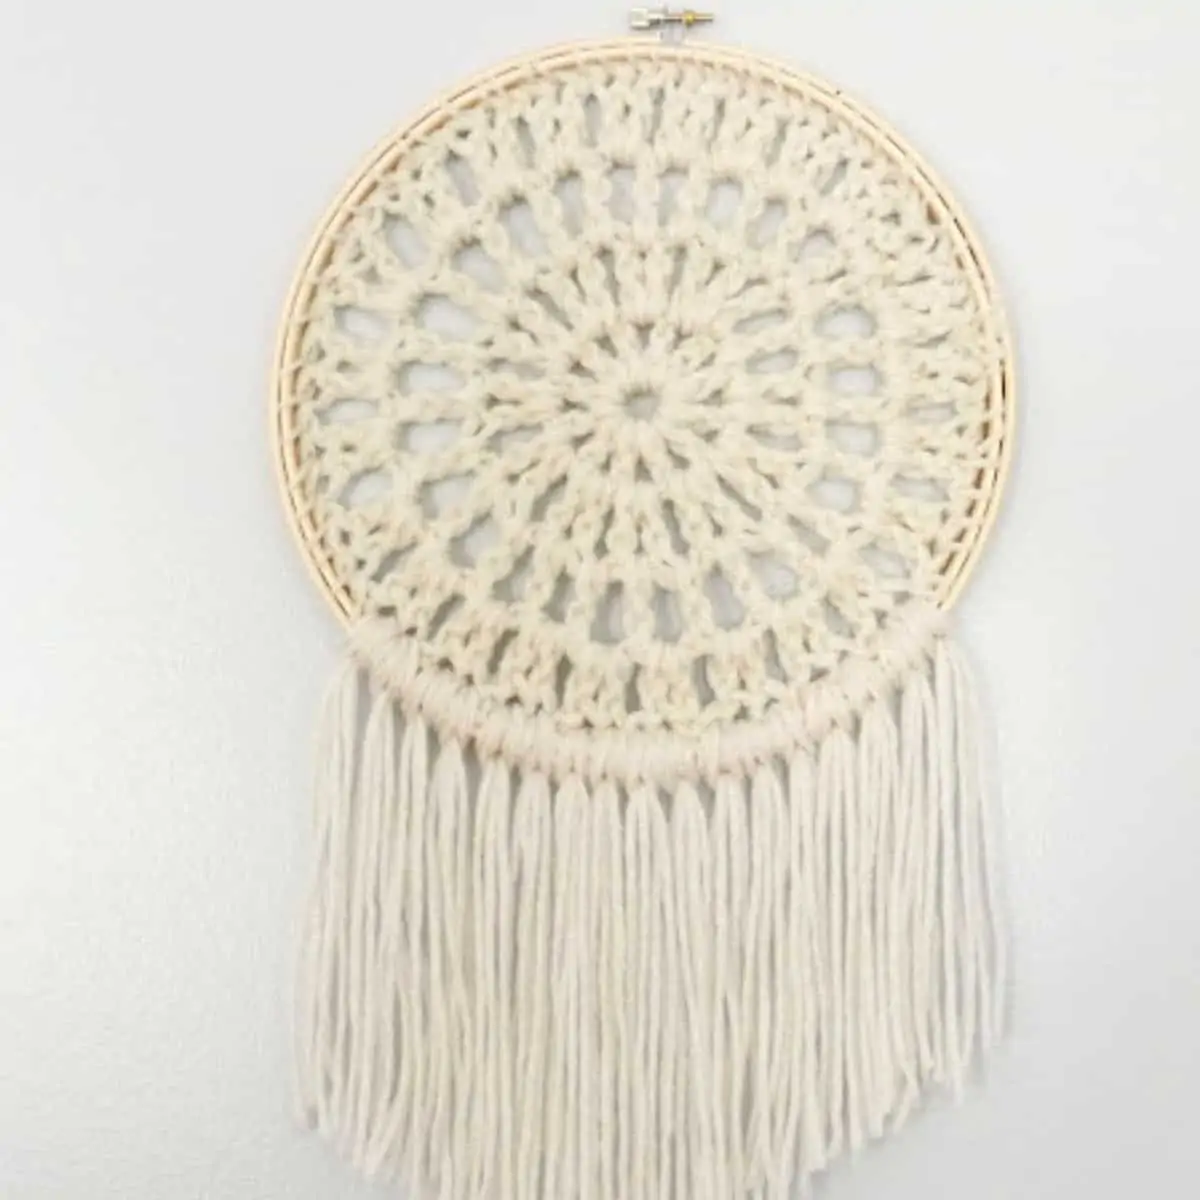 round crochet wall hanging in an embroidery hoop